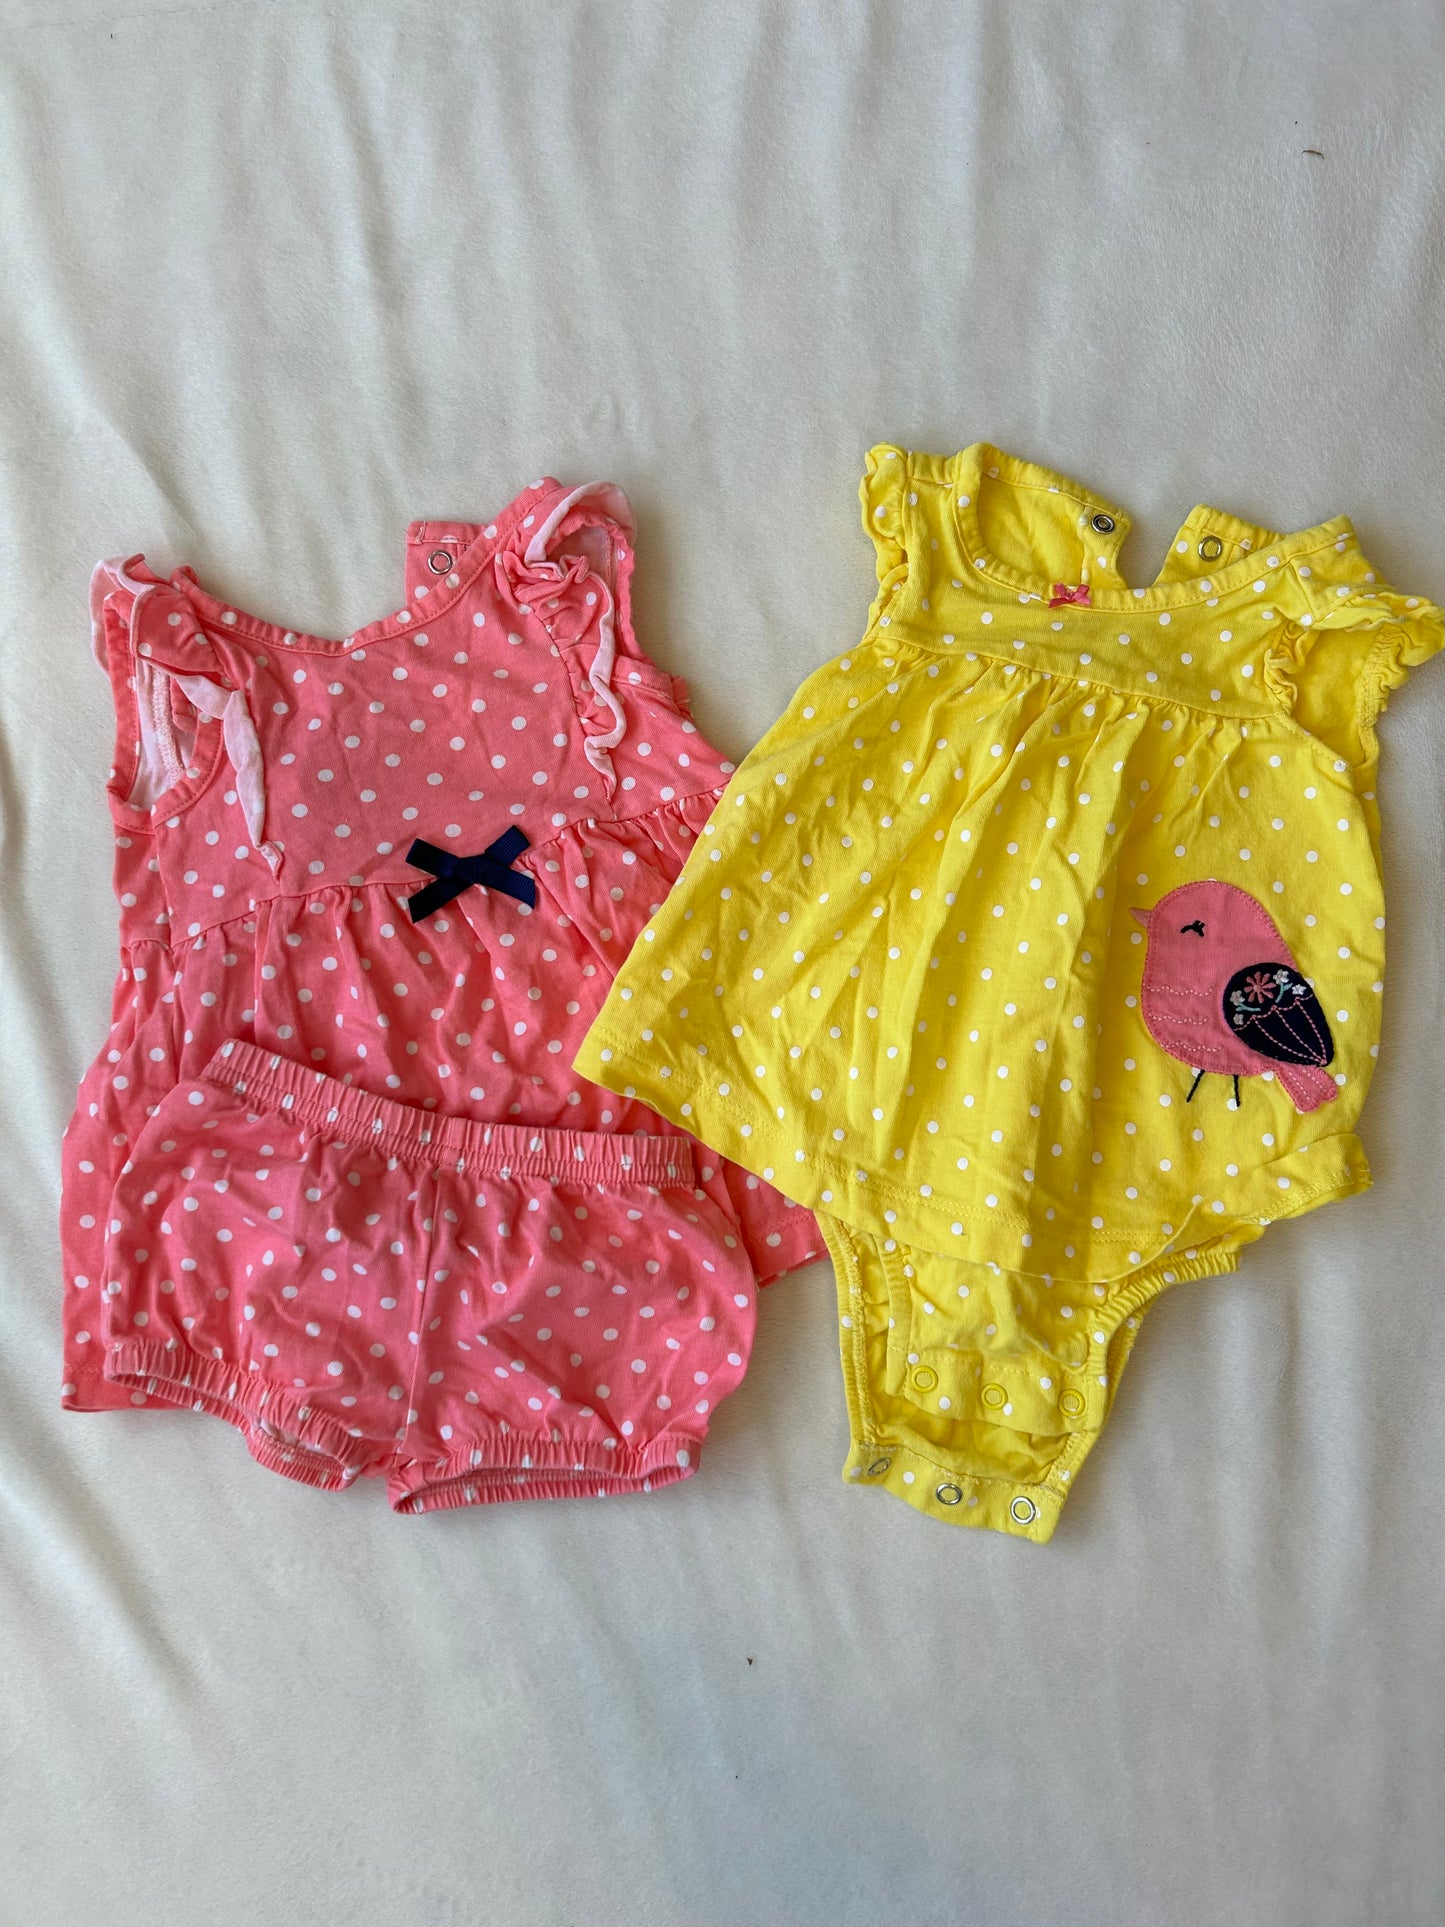 Simple Joys Girl 3-6 Month Romper Set (2) Pink and Yellow w/ Dots EUC